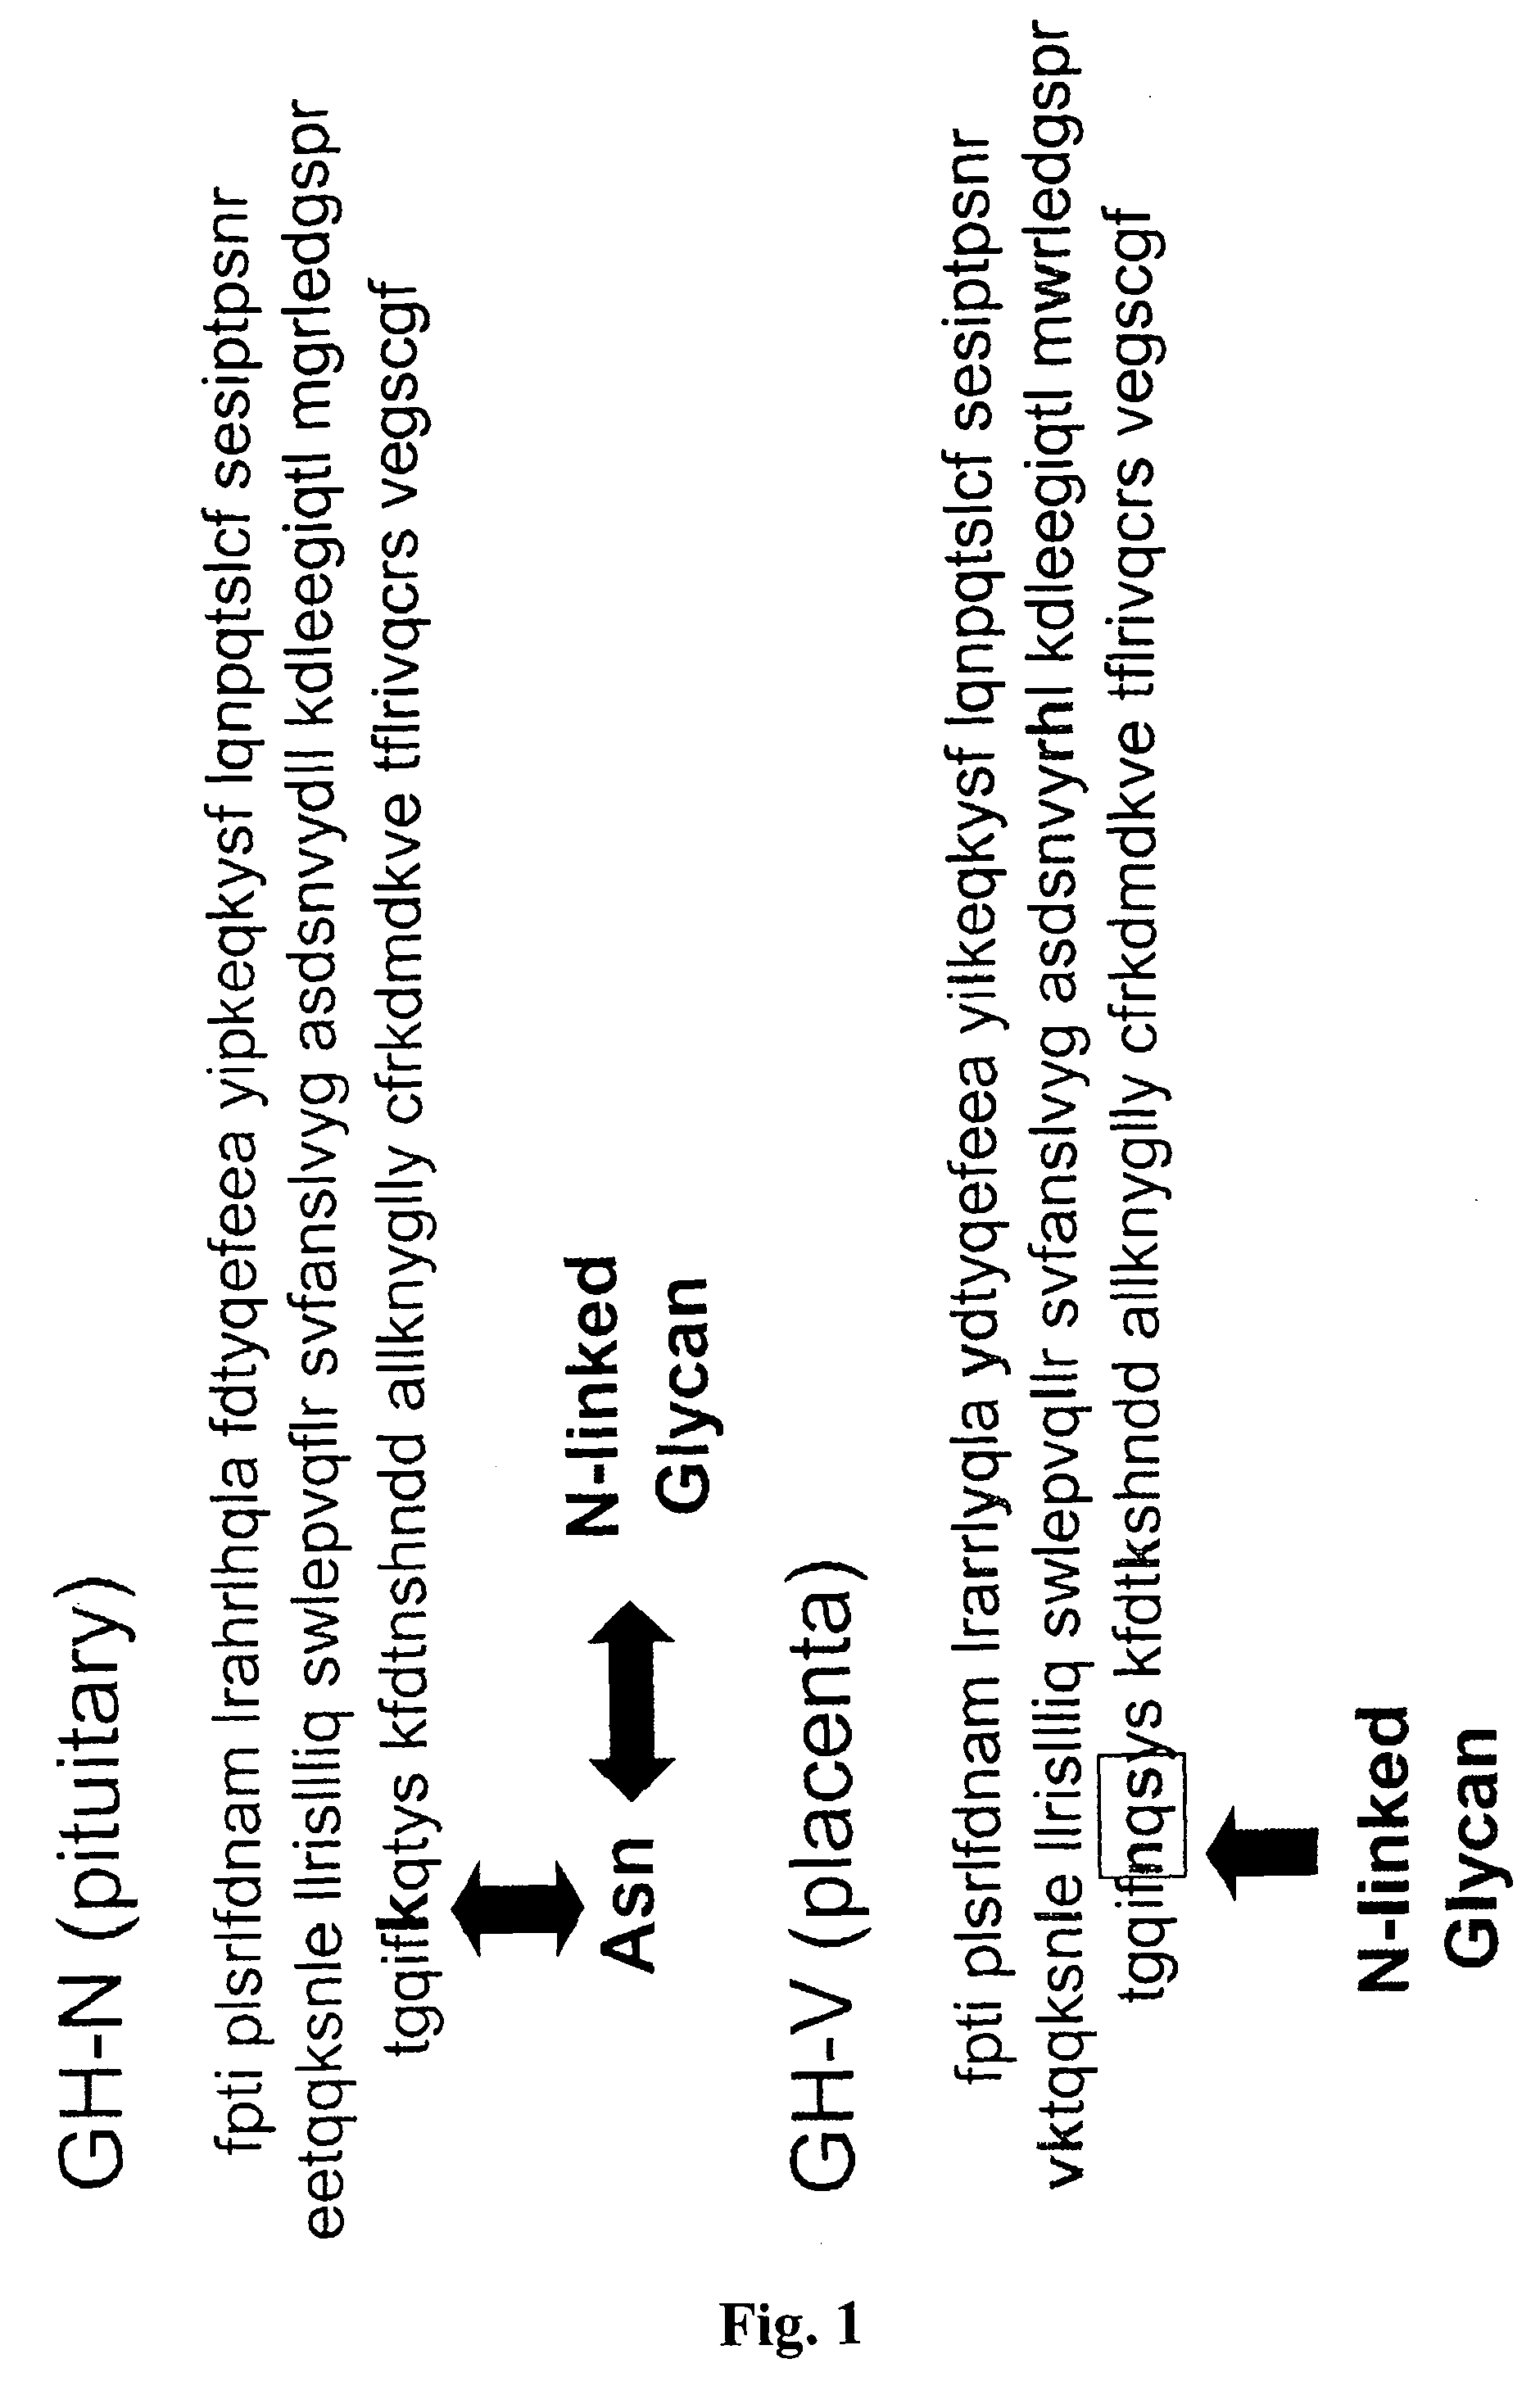 Compositions and methods for the preparation of human growth hormone glycosylation mutants